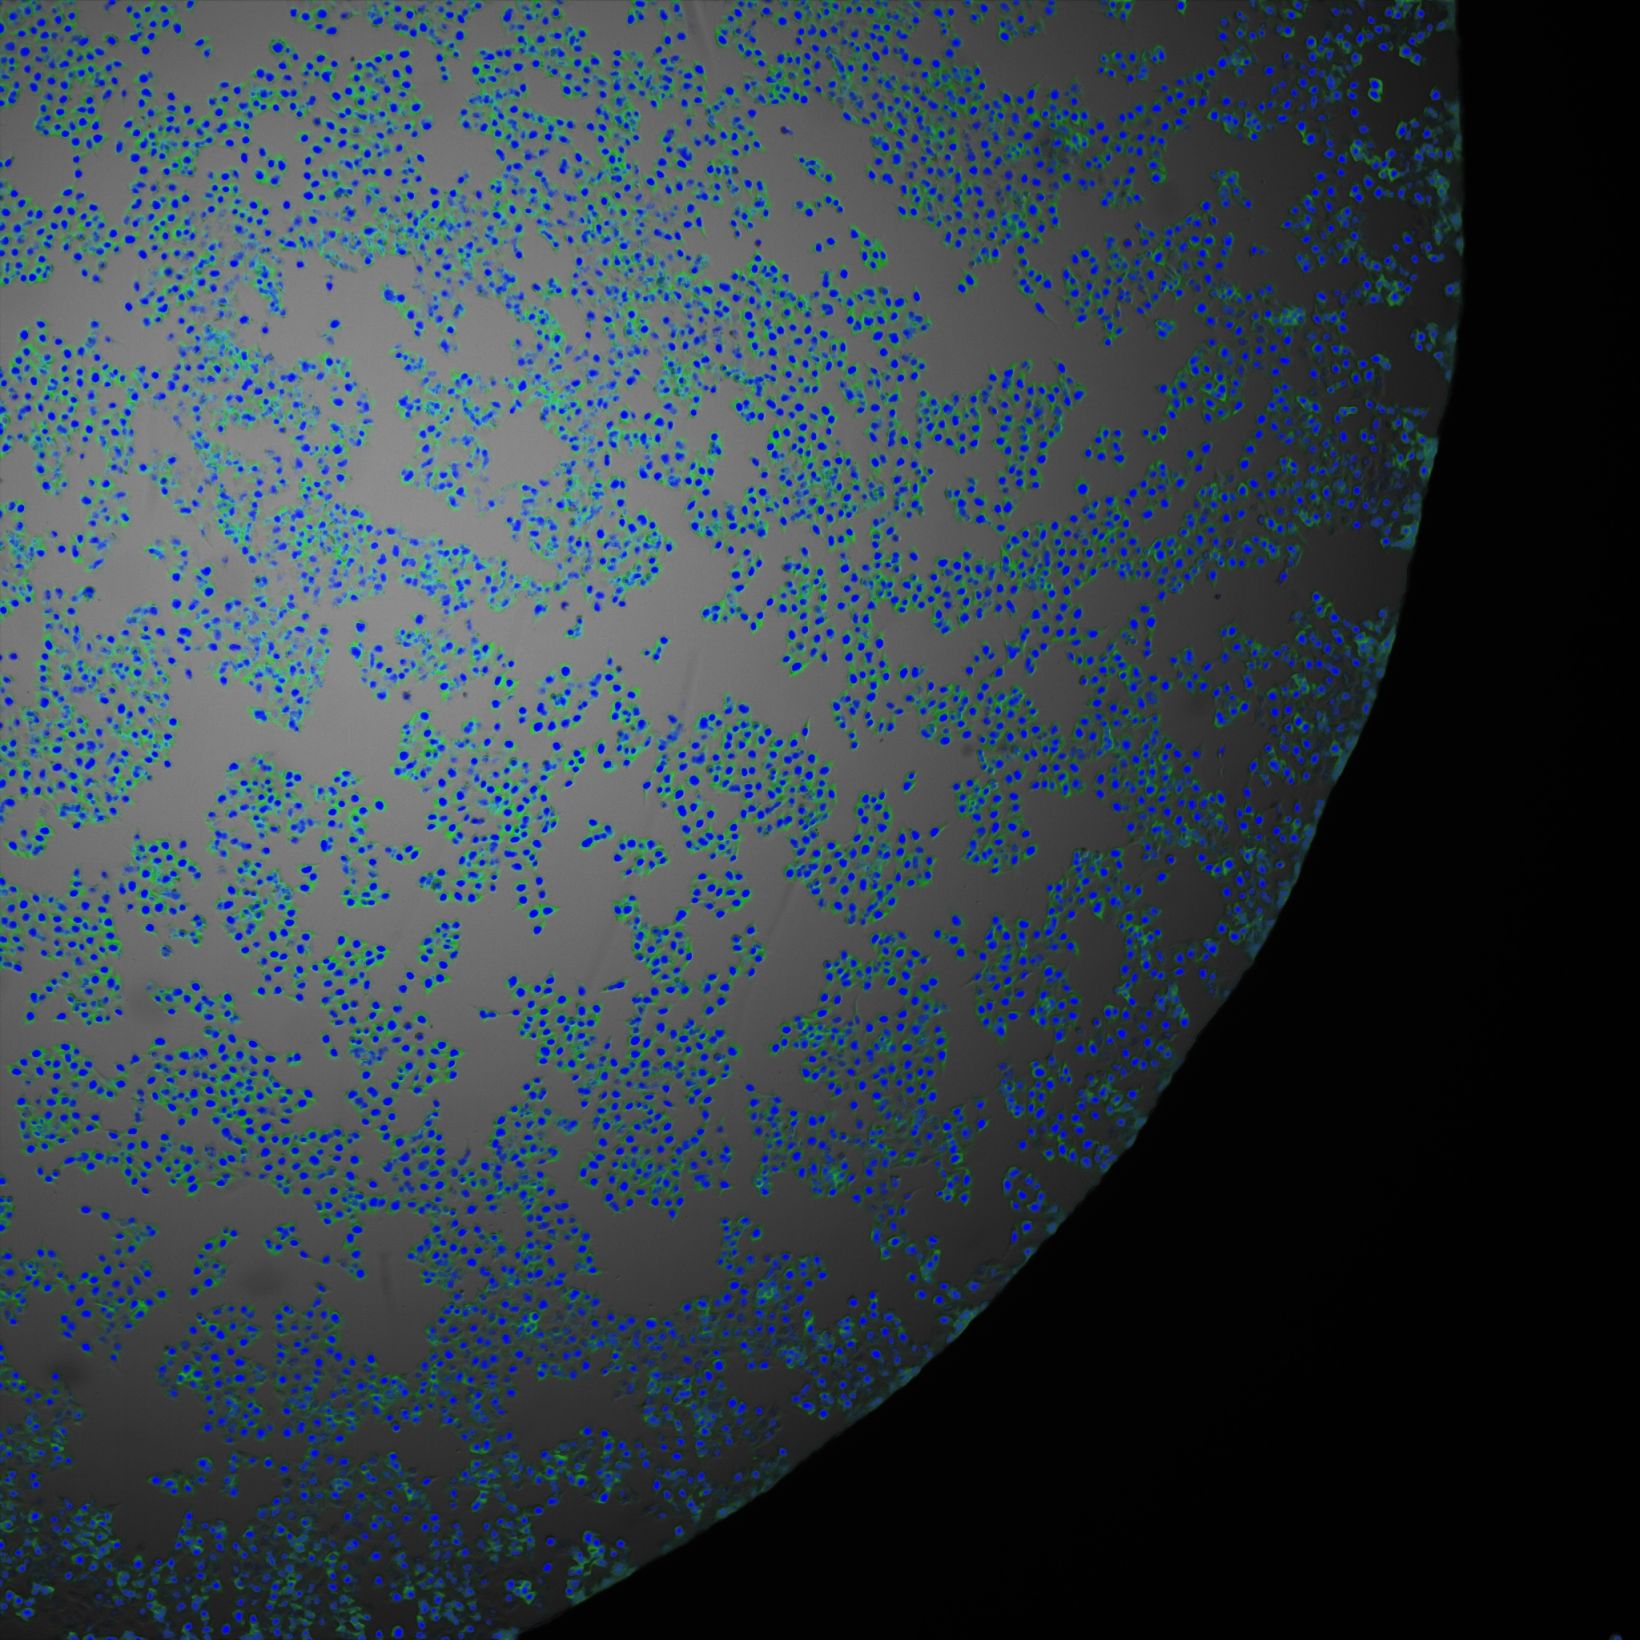 TruAI prediction of the position of cells in a well plate based on a low-contrast brightfield image